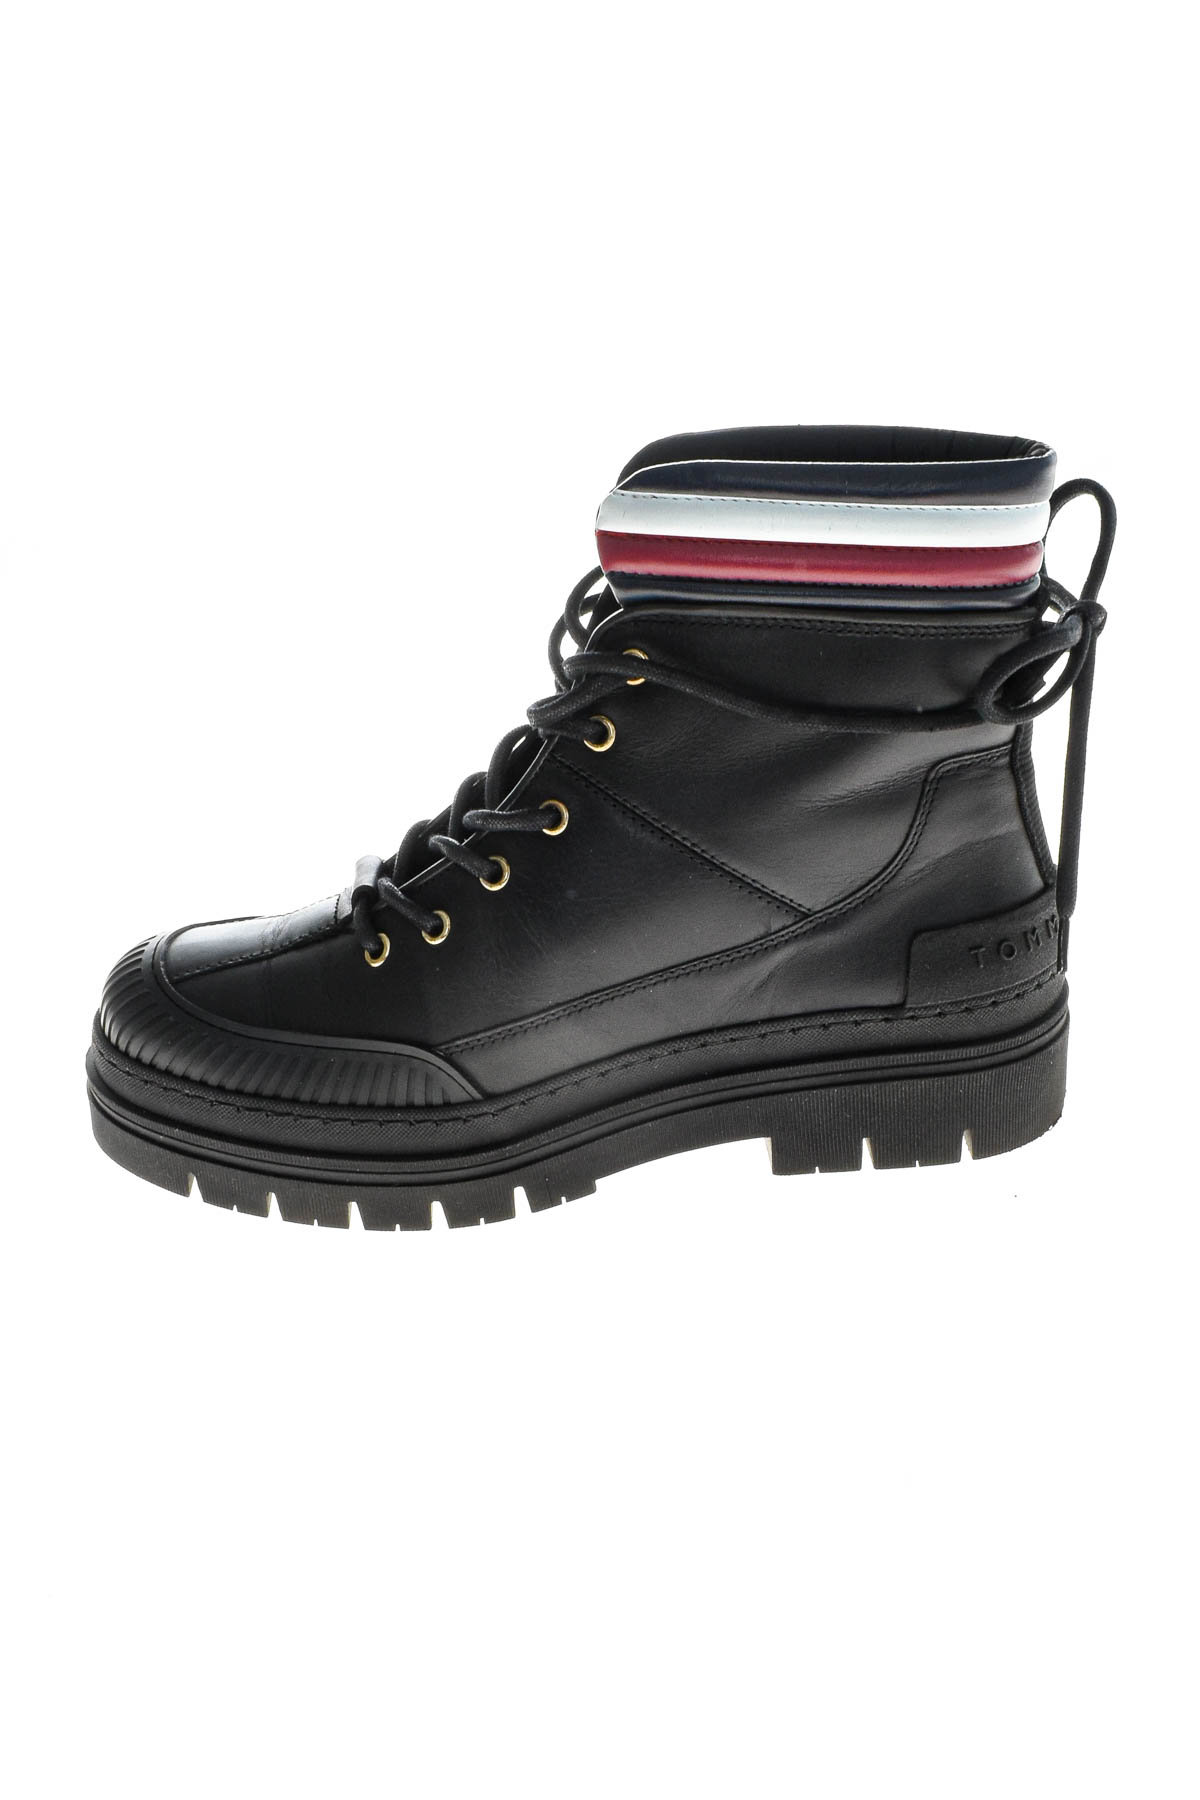 Women's boots - TOMMY HILFIGER - 0